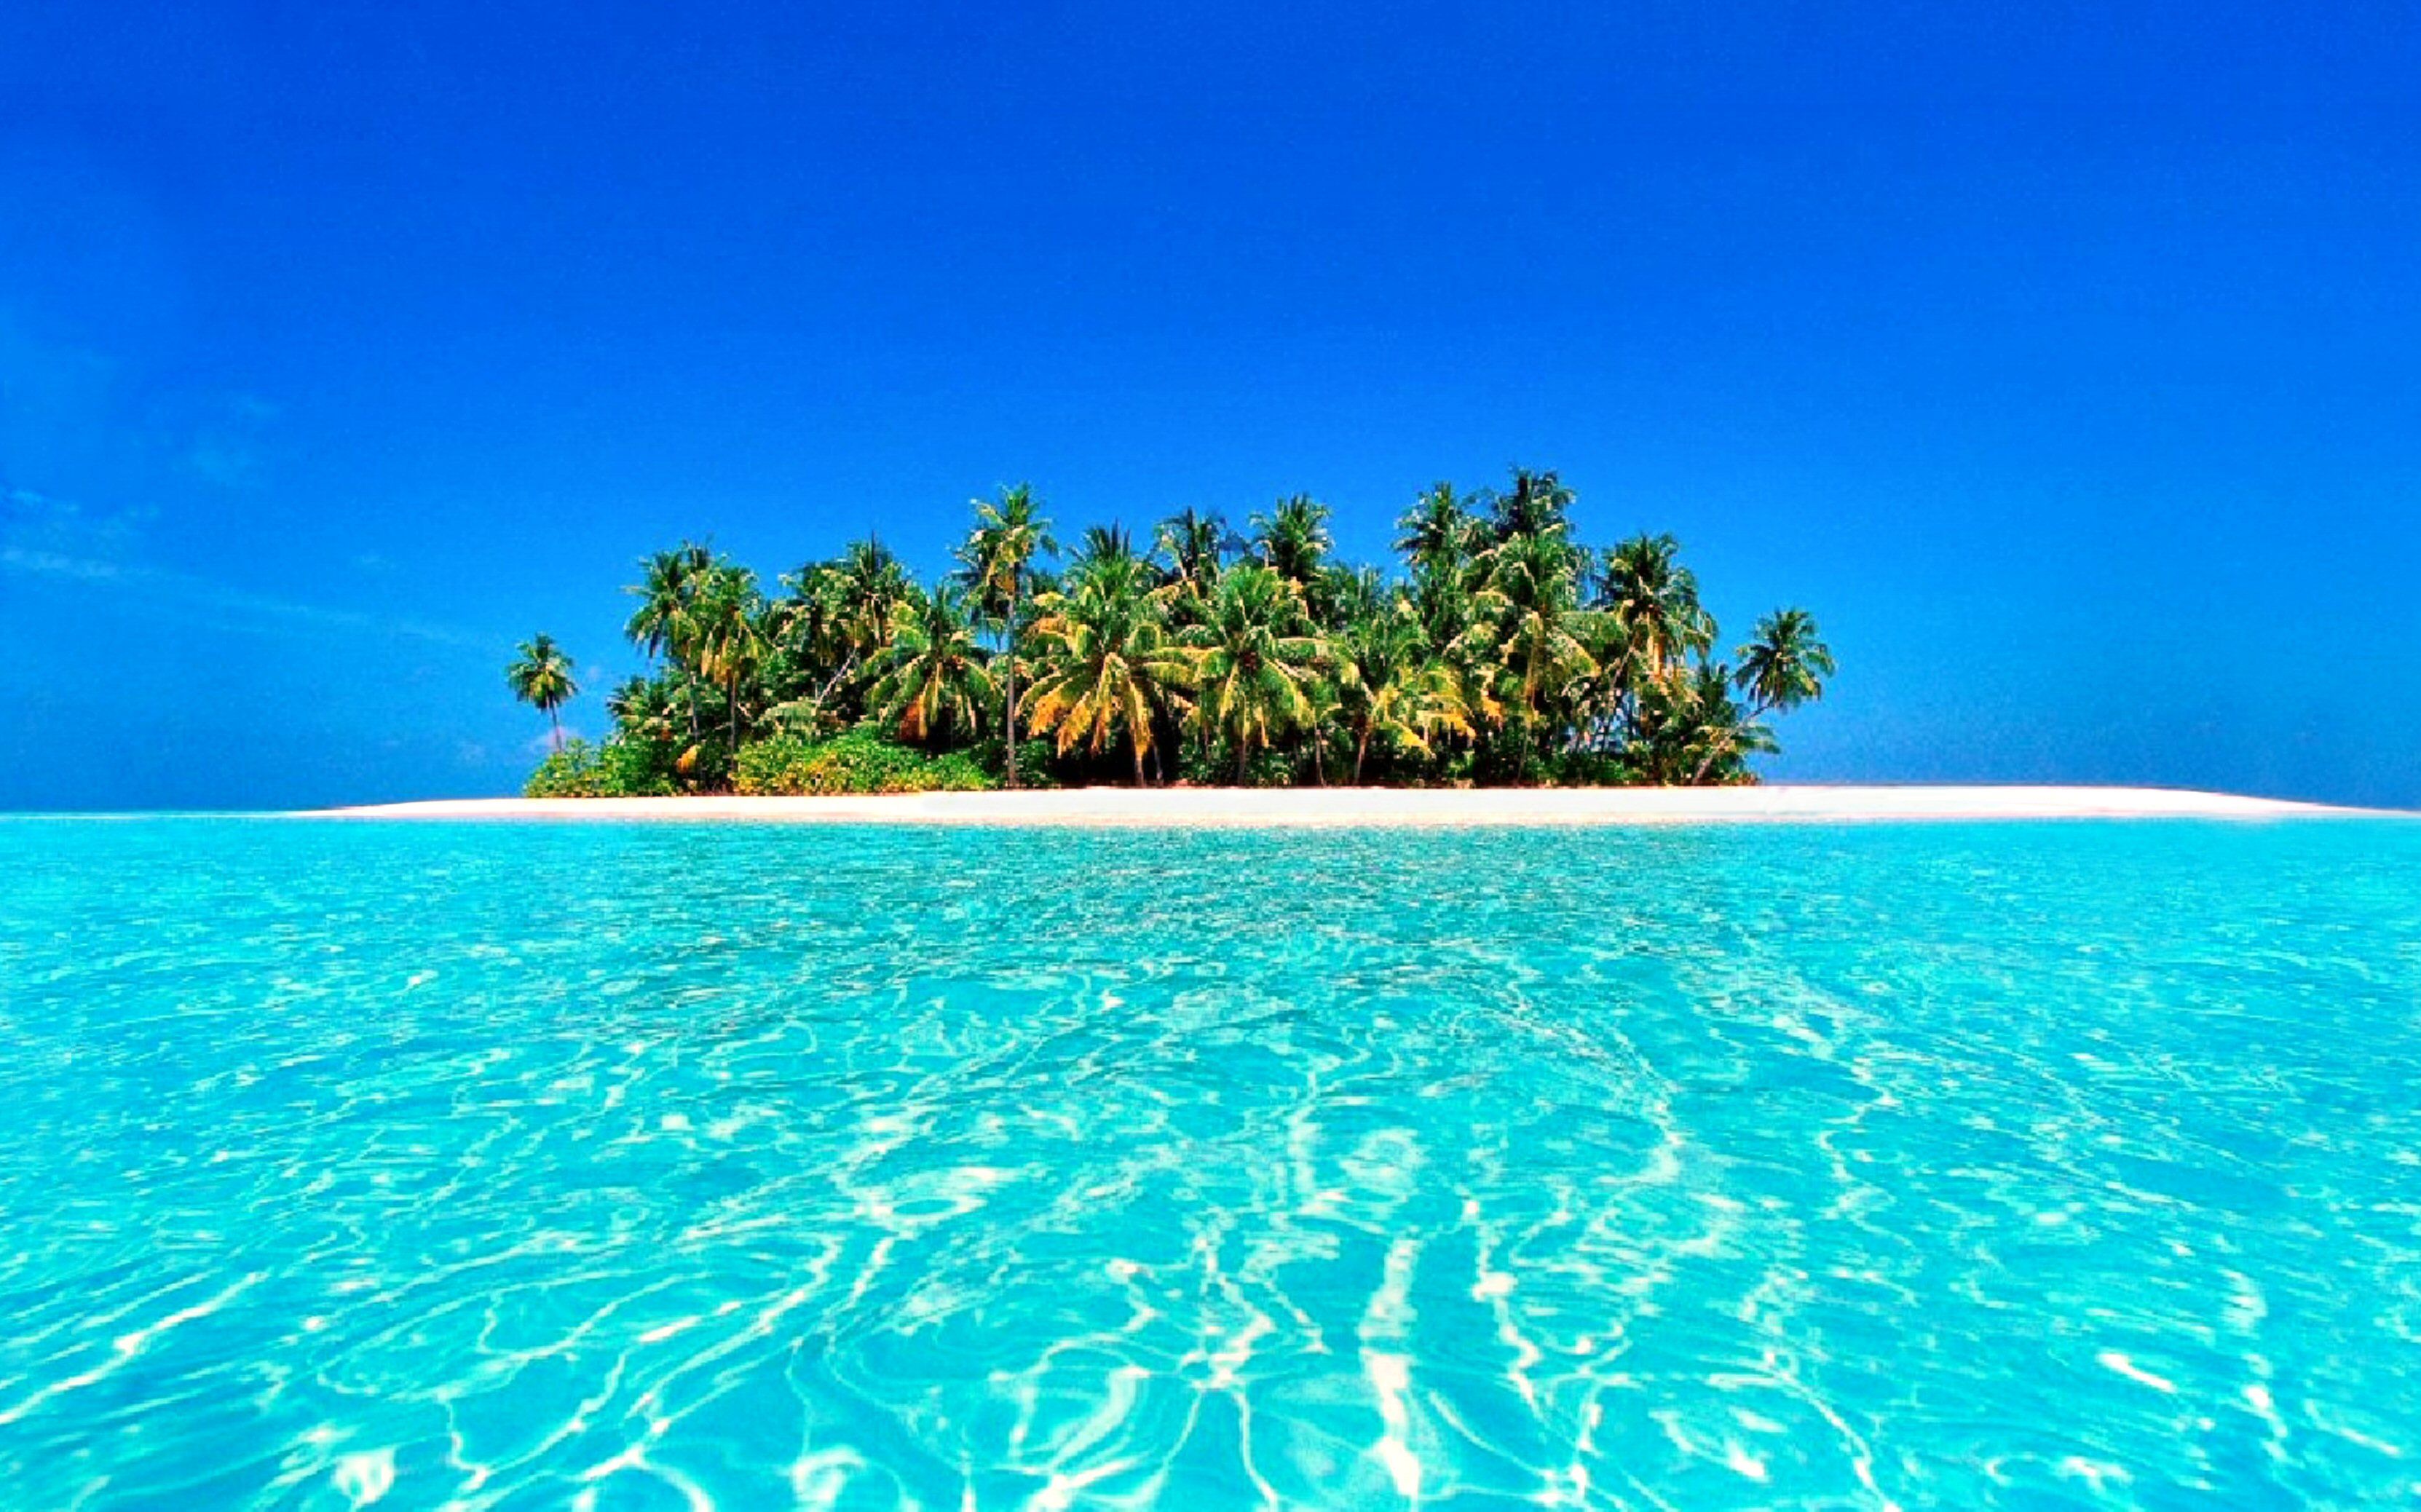 50 Tropical HD Wallpapers Backgrounds - Wallpaper Abyss